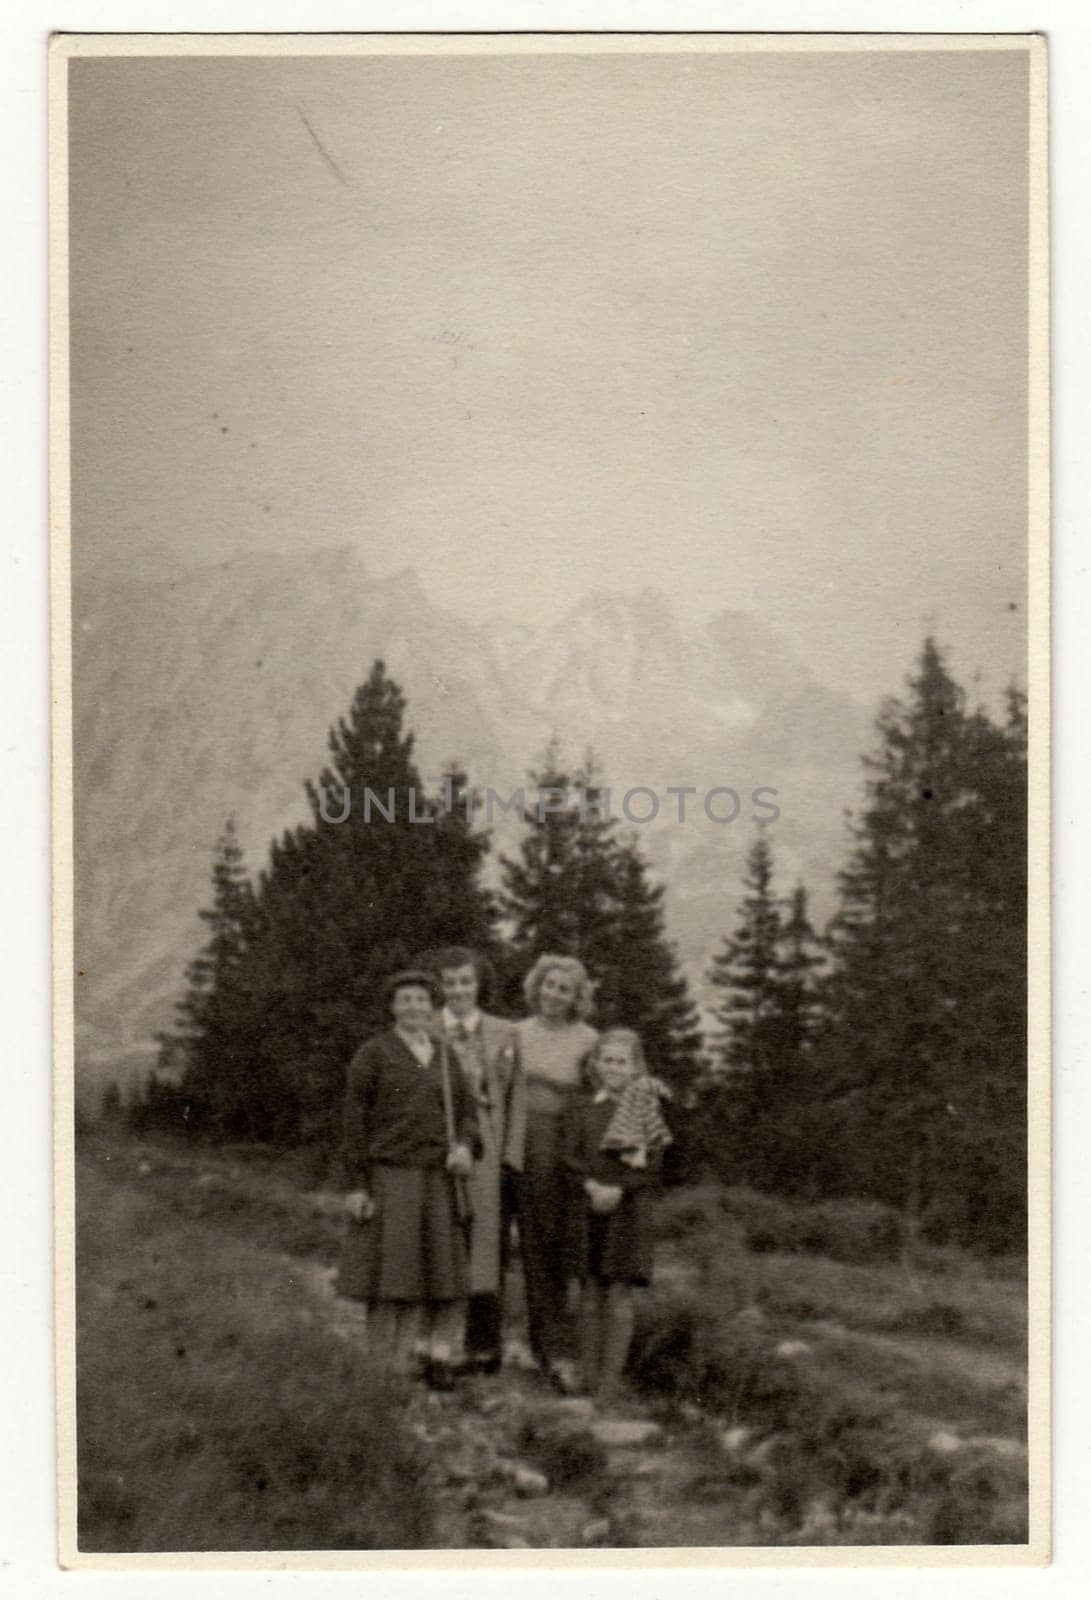 THE CZECHOSLOVAK SOCIALIST REPUBLIC, CIRCA 1950s: Vintage photo shows people on vacation in mountain.